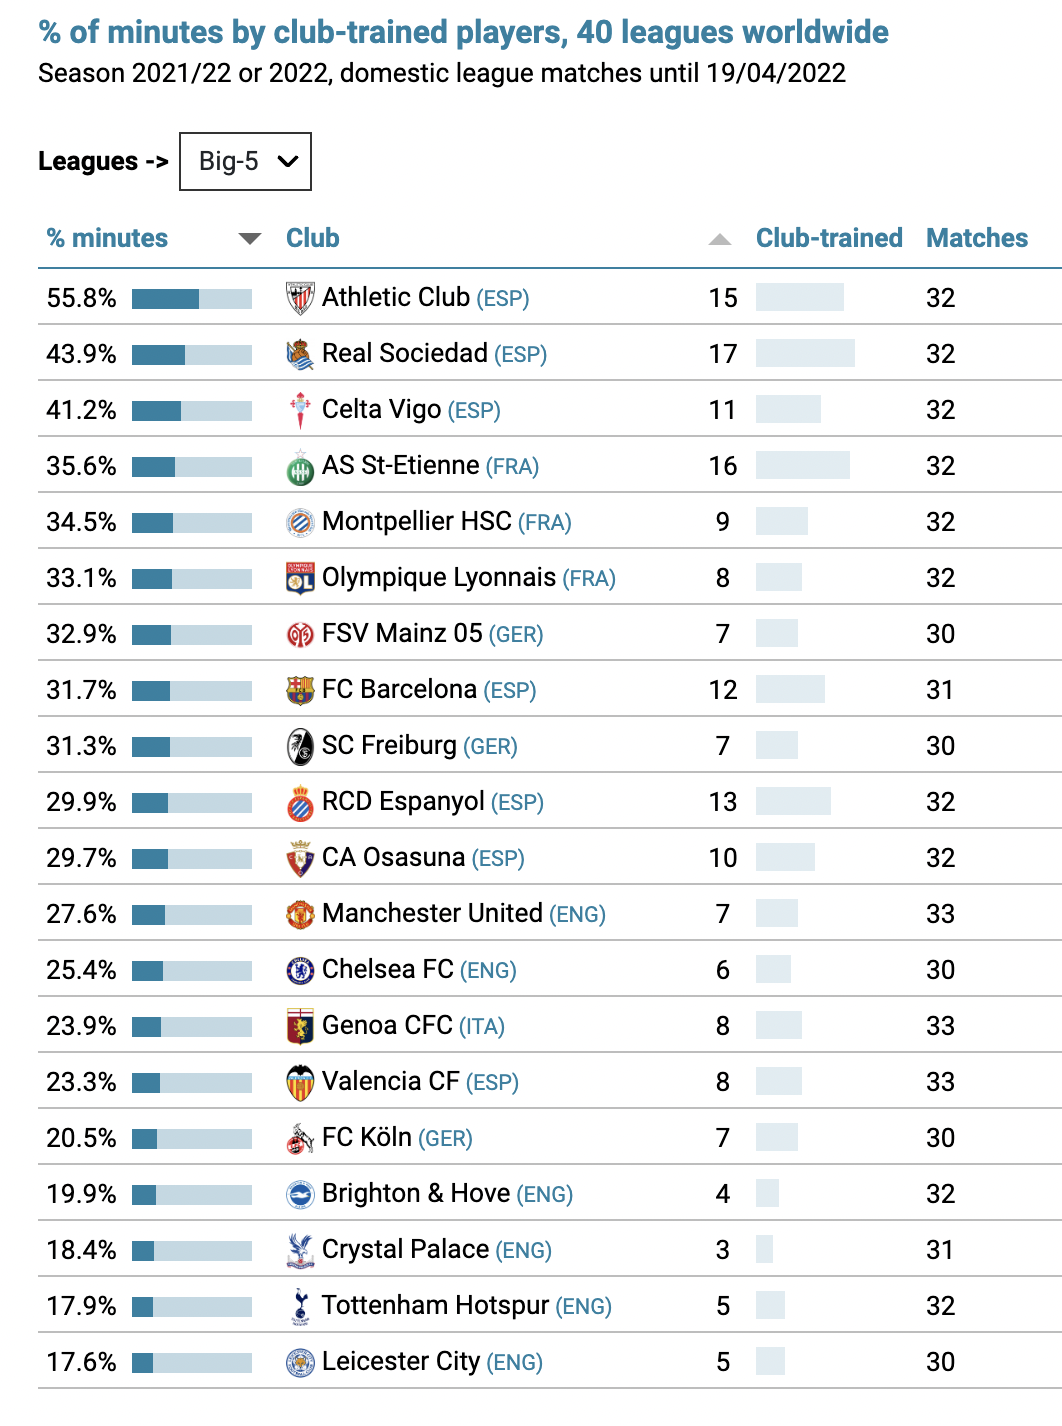 Top 20 clubs in Europe's big 5 leagues for club-trained minutes (CIES)